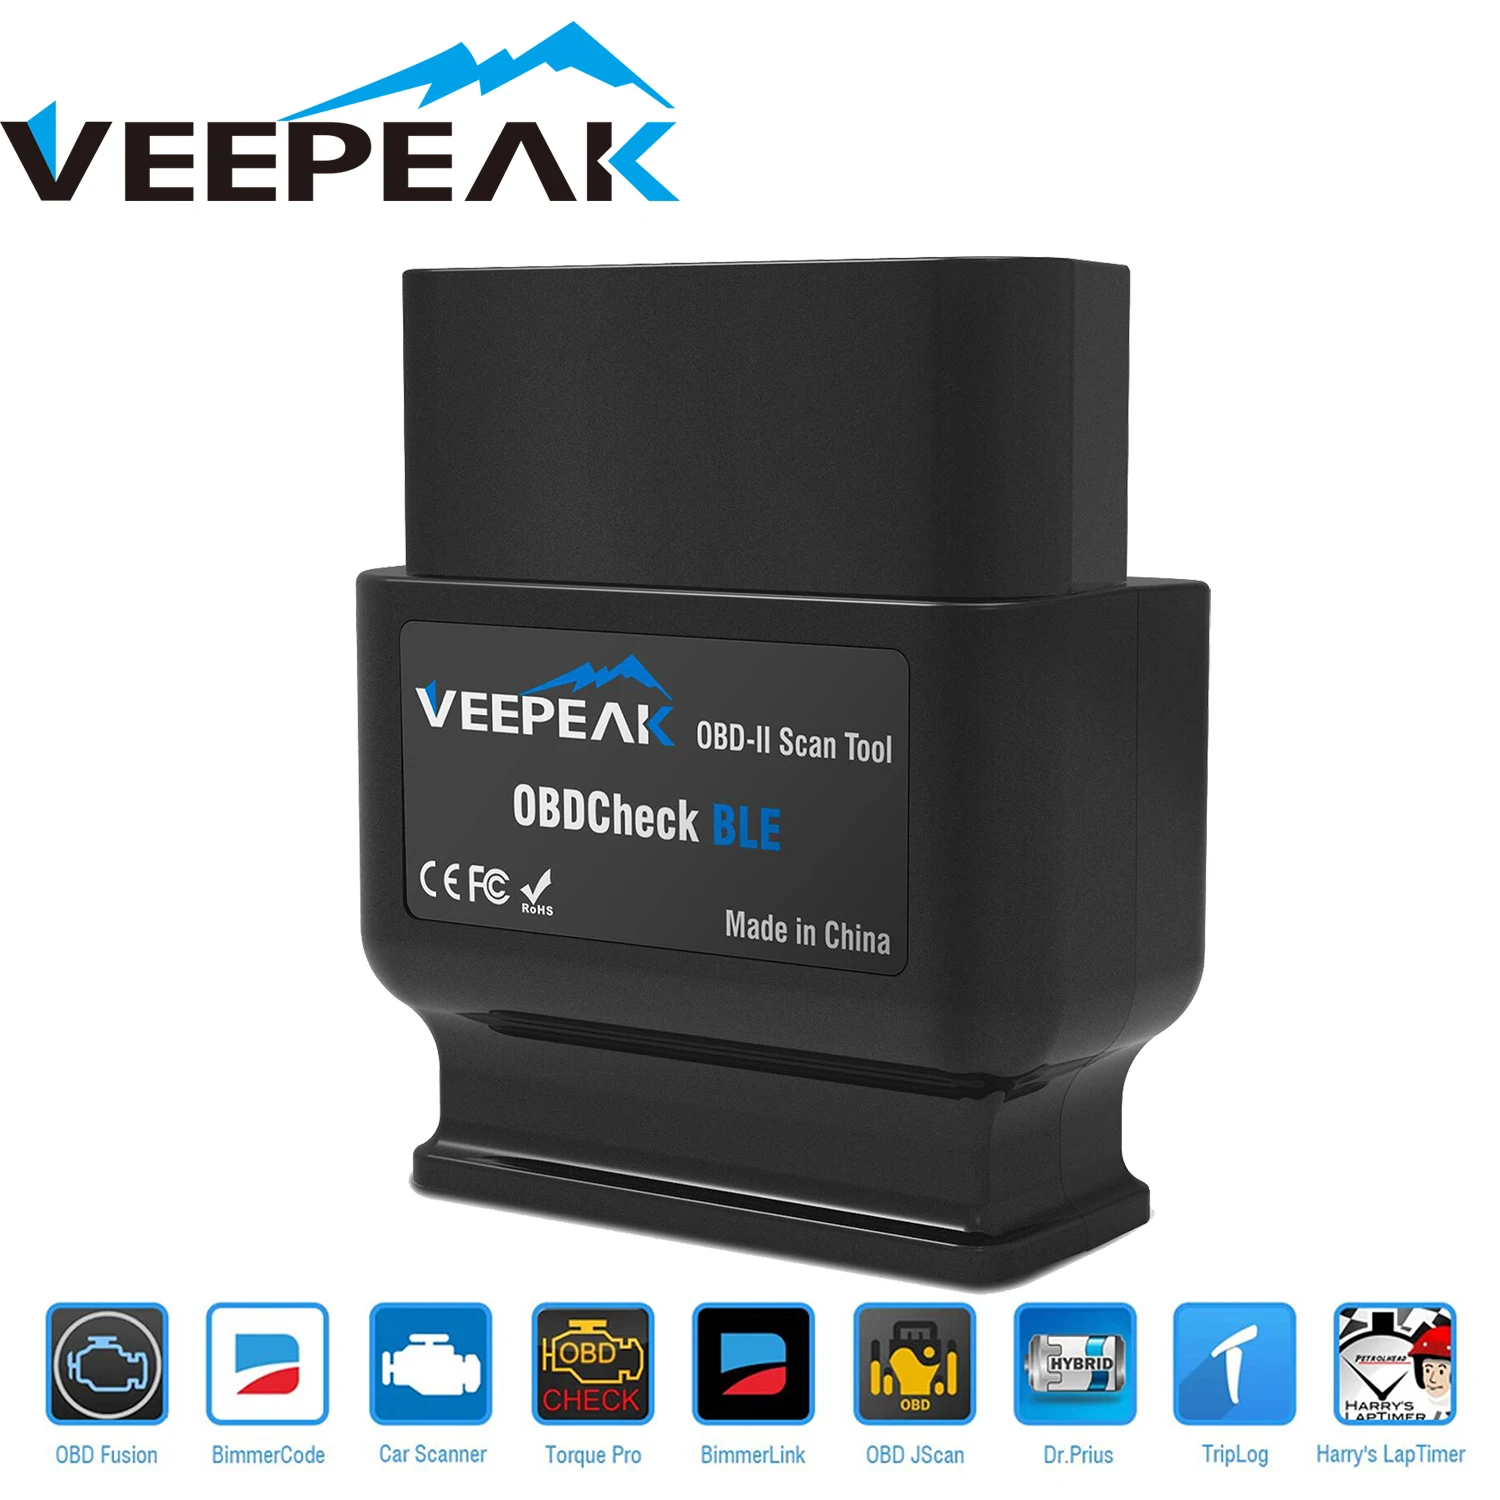 Veepeak OBDCheck BLE OBD2 Bluetooth Scanner Auto OBD II Diagnostic Scan Tool for iOS & Android, BT4.0 Car Check Engine vgate obdii bluetooth vlinker bm obd scanner obd2 diagnostic tool check engine light for android